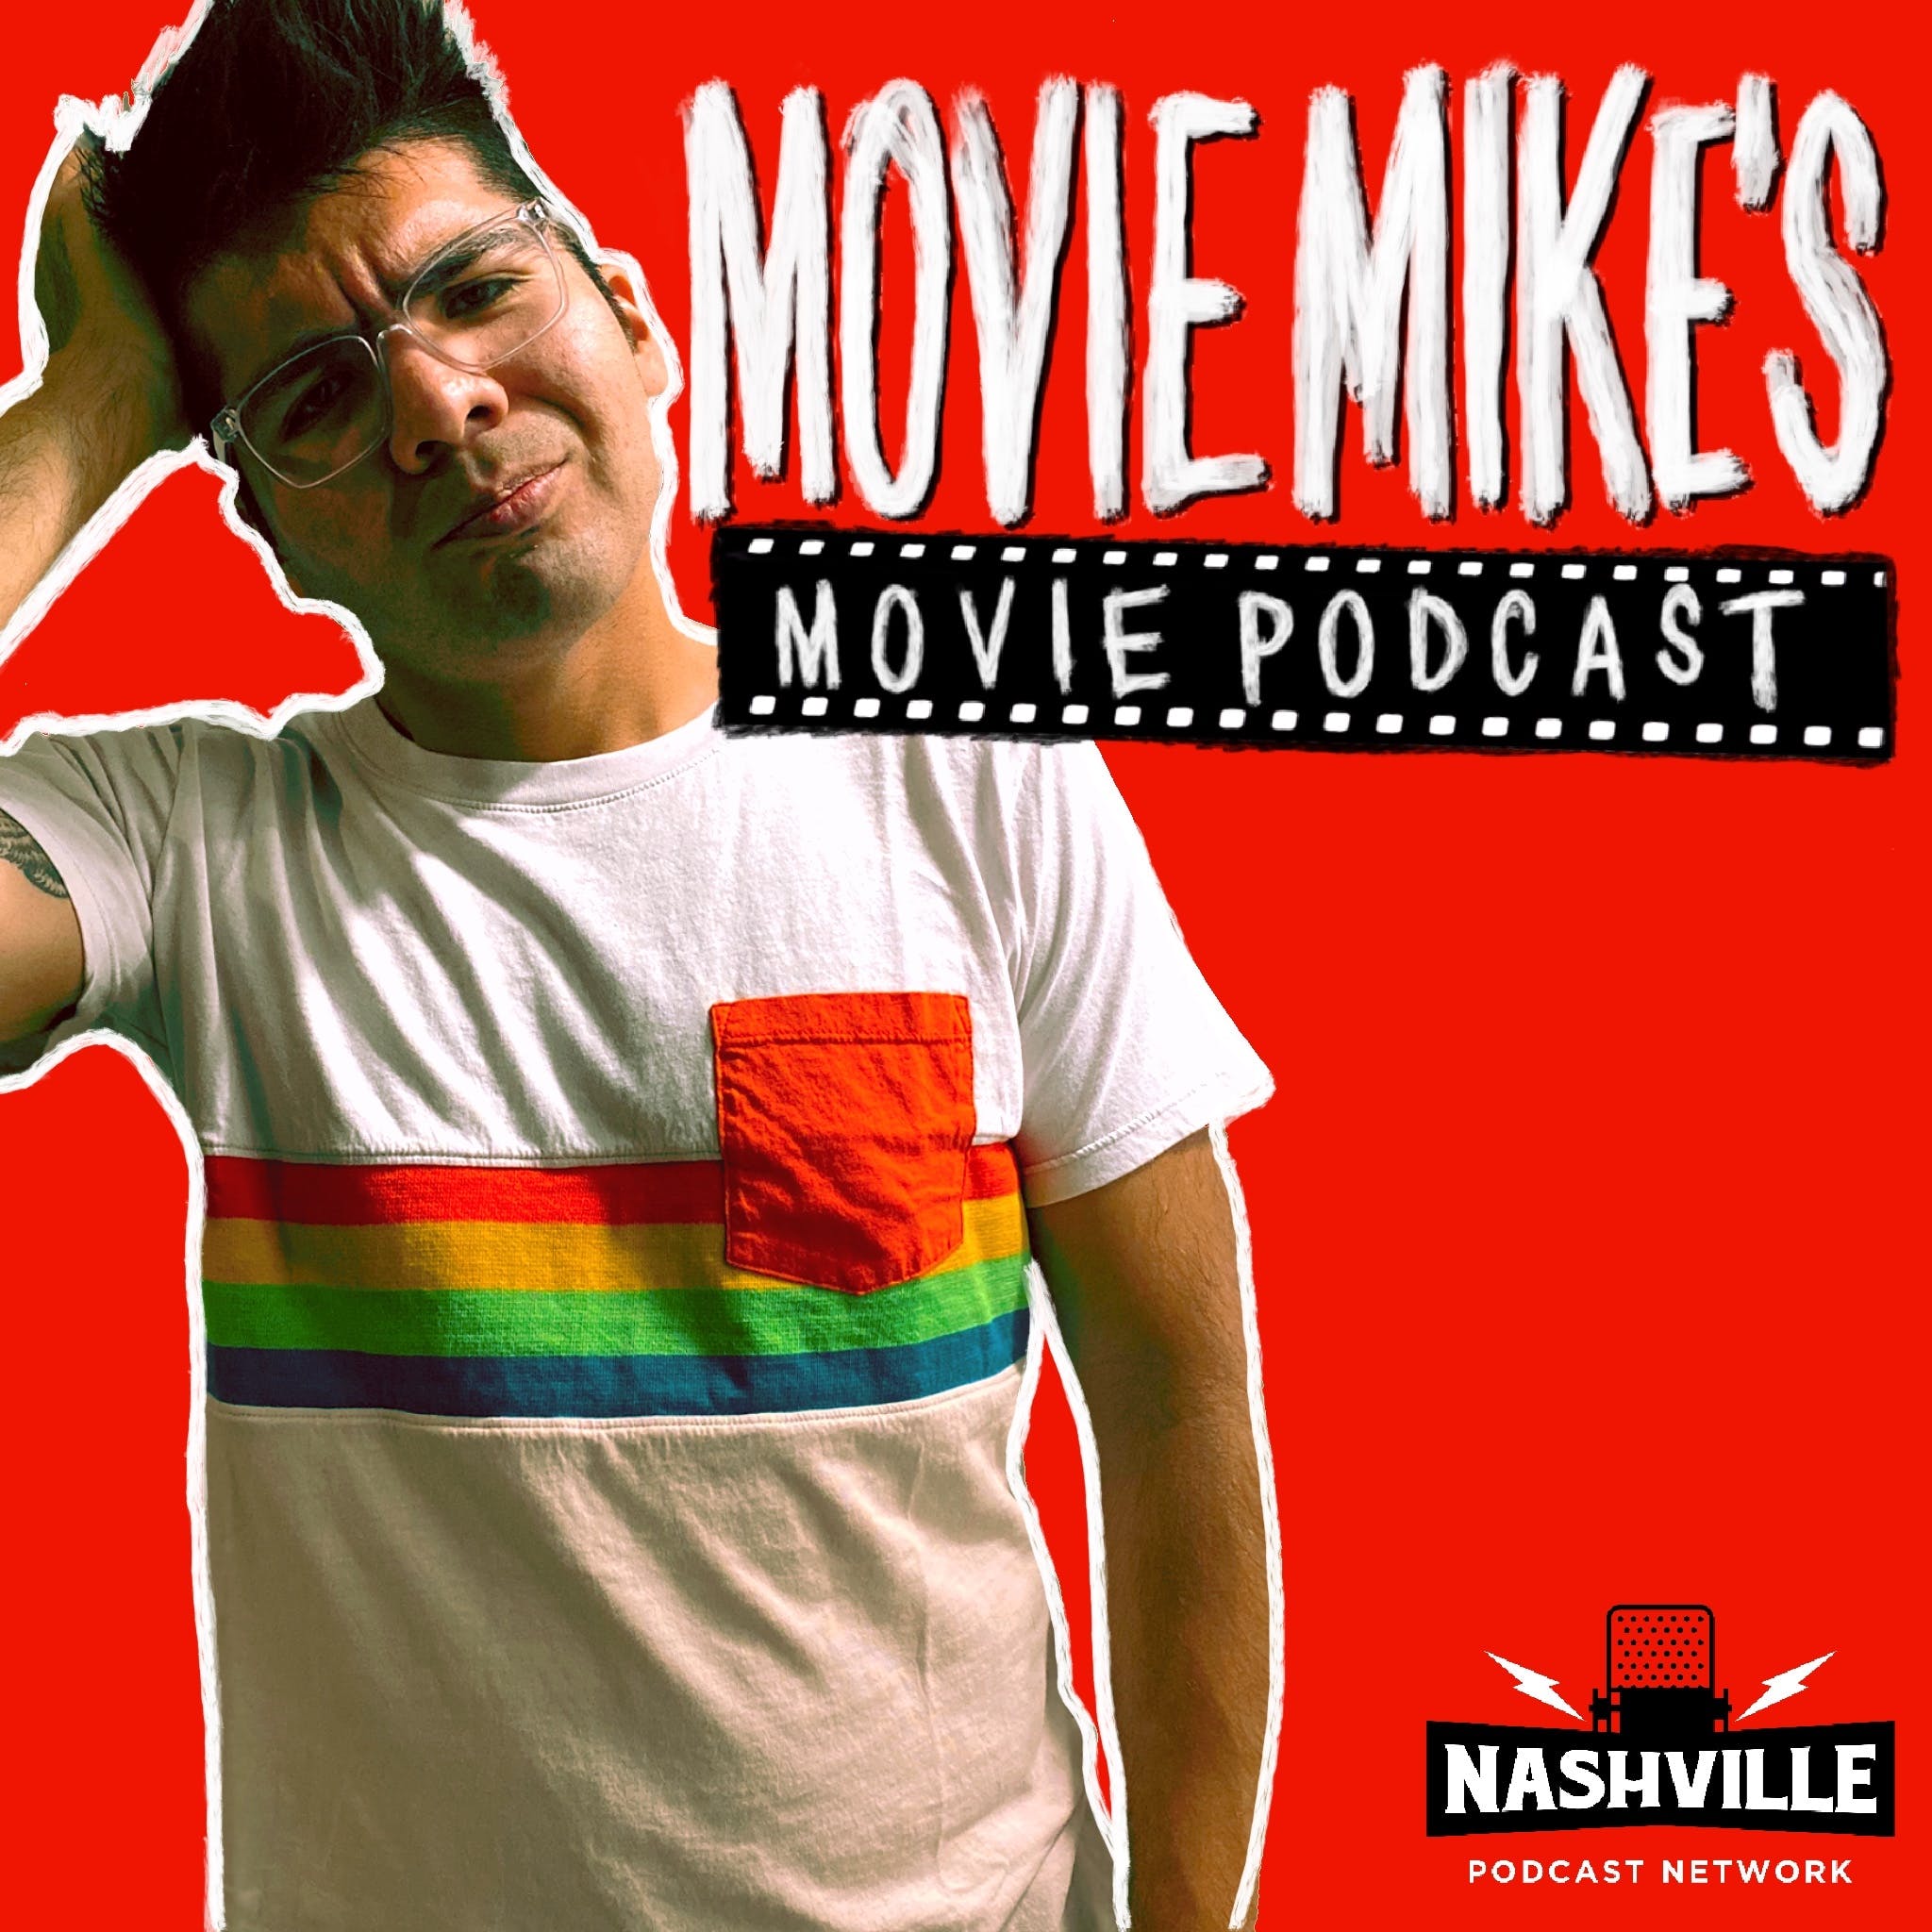 Twister Director SHOCKED! Movie Mike Sets a Record!  + Movie Review: The Bike Riders +  Trailer Park: Long Legs